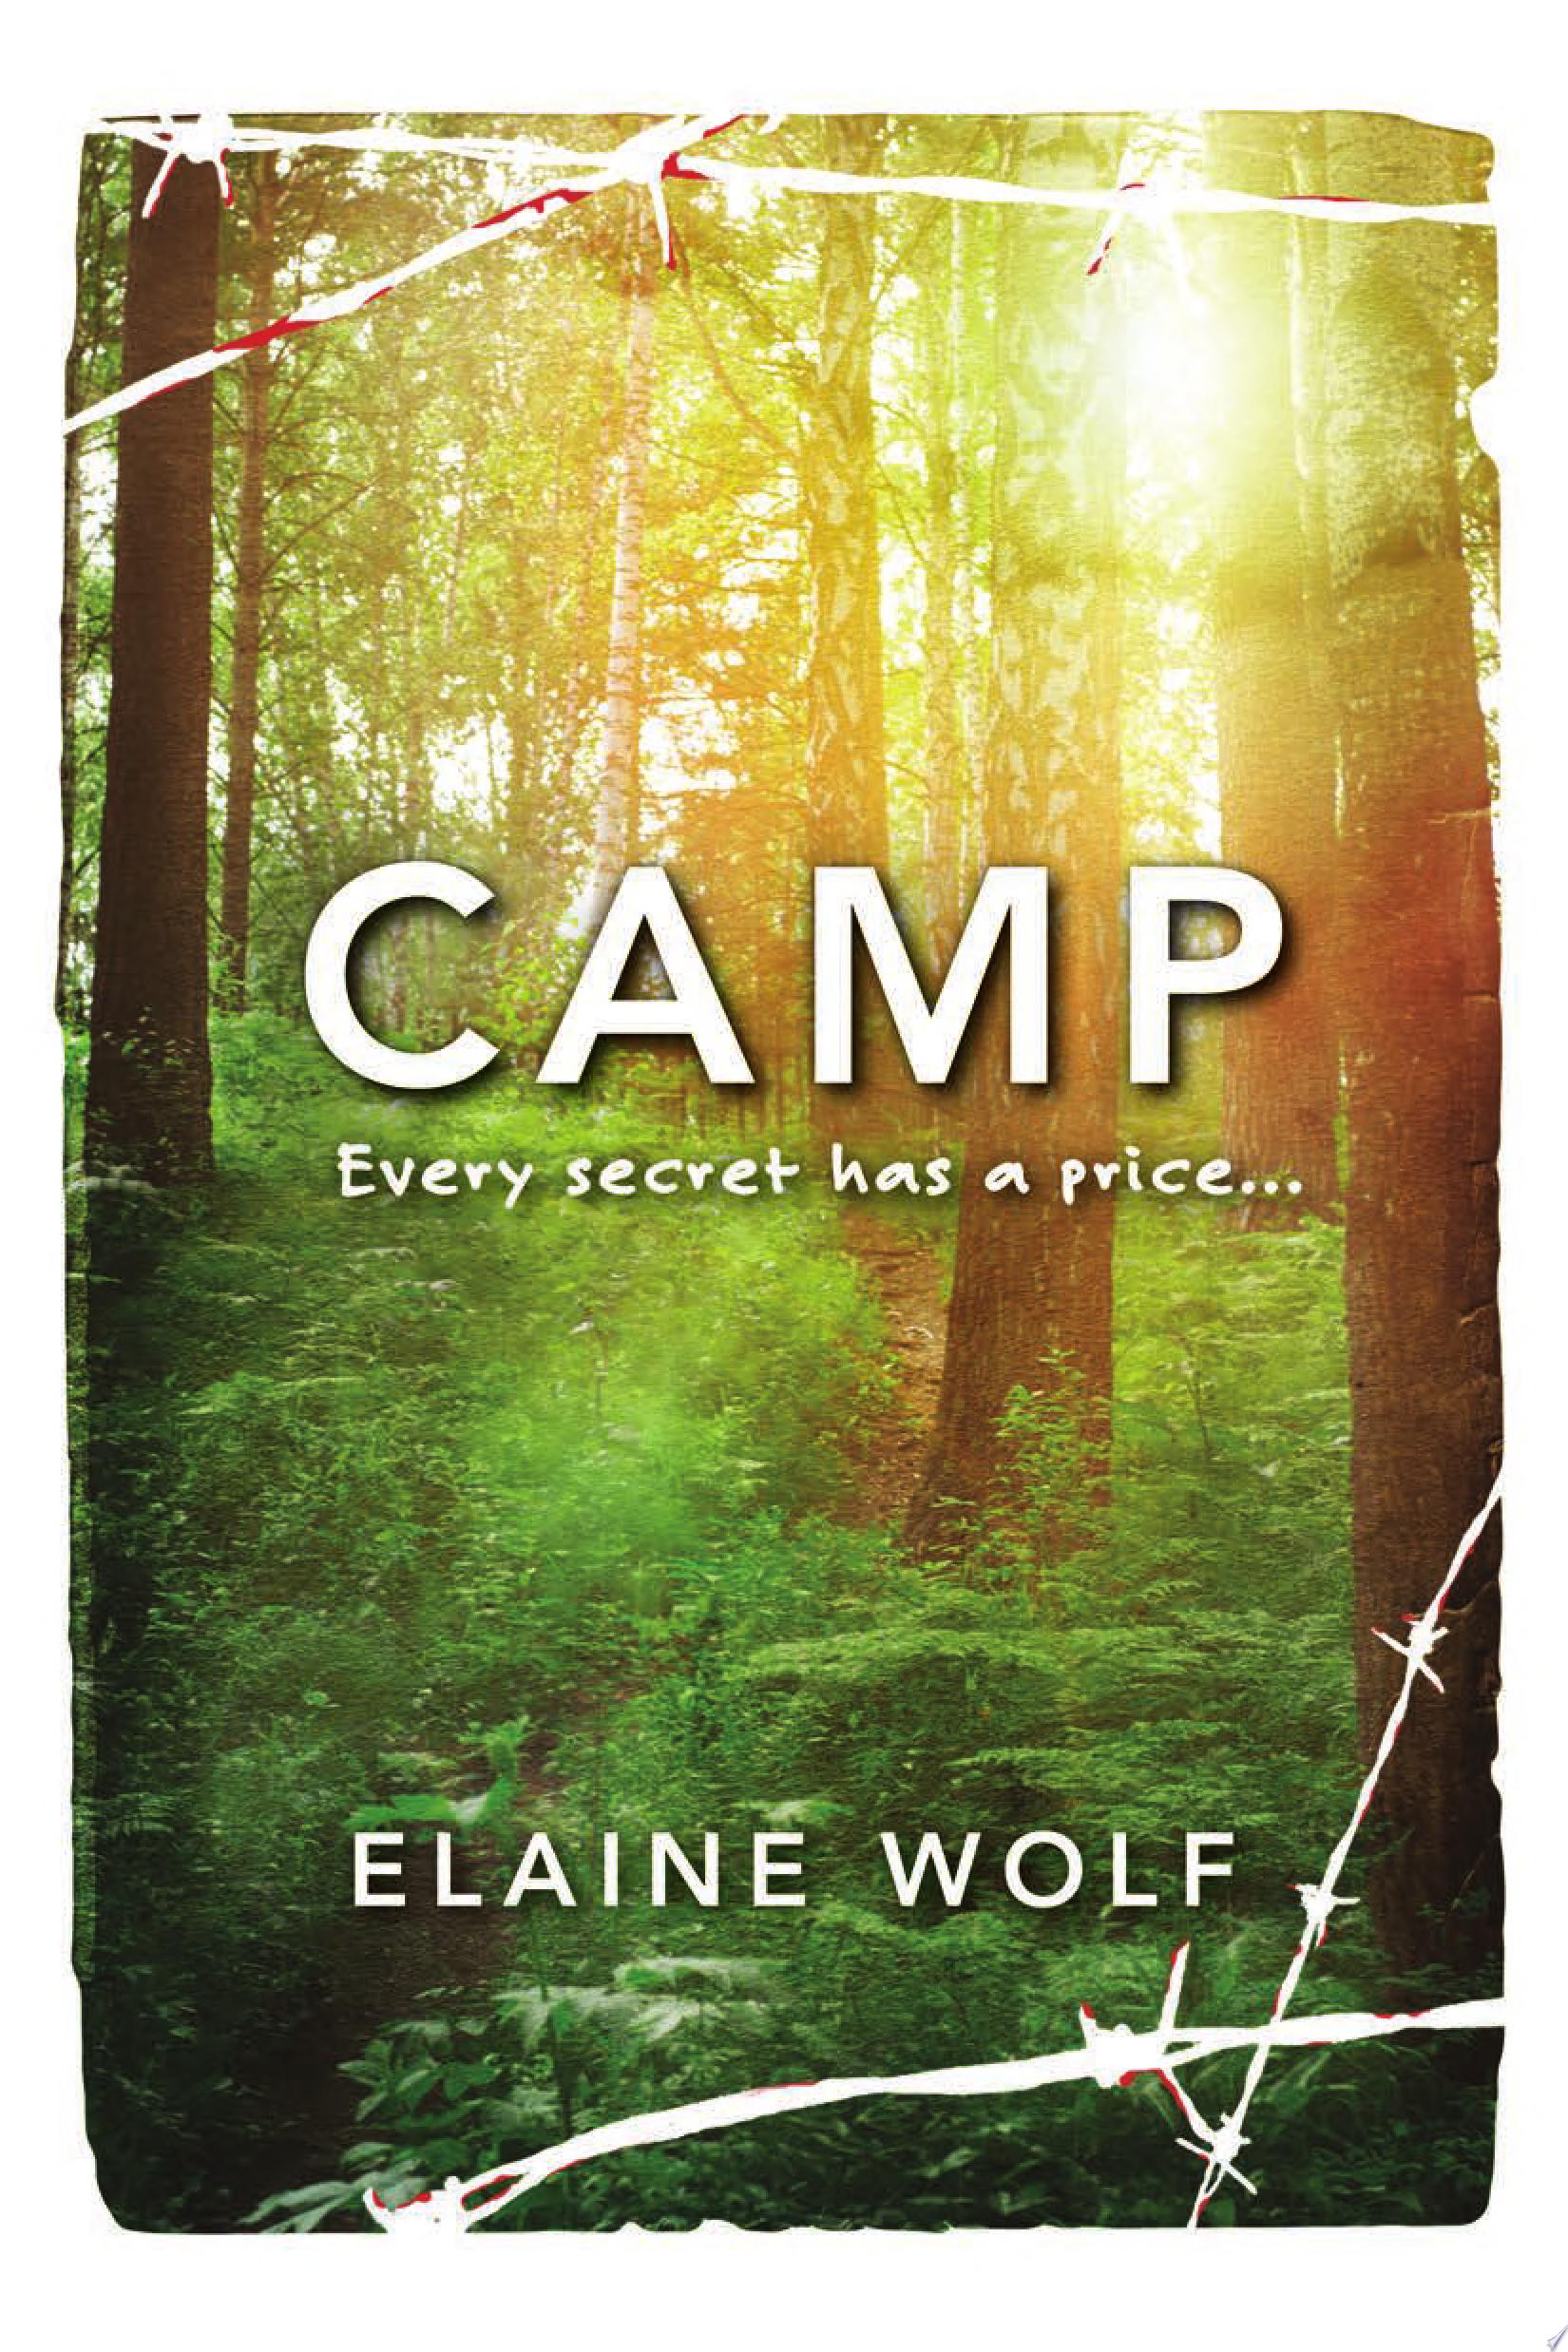 Image for "Camp"